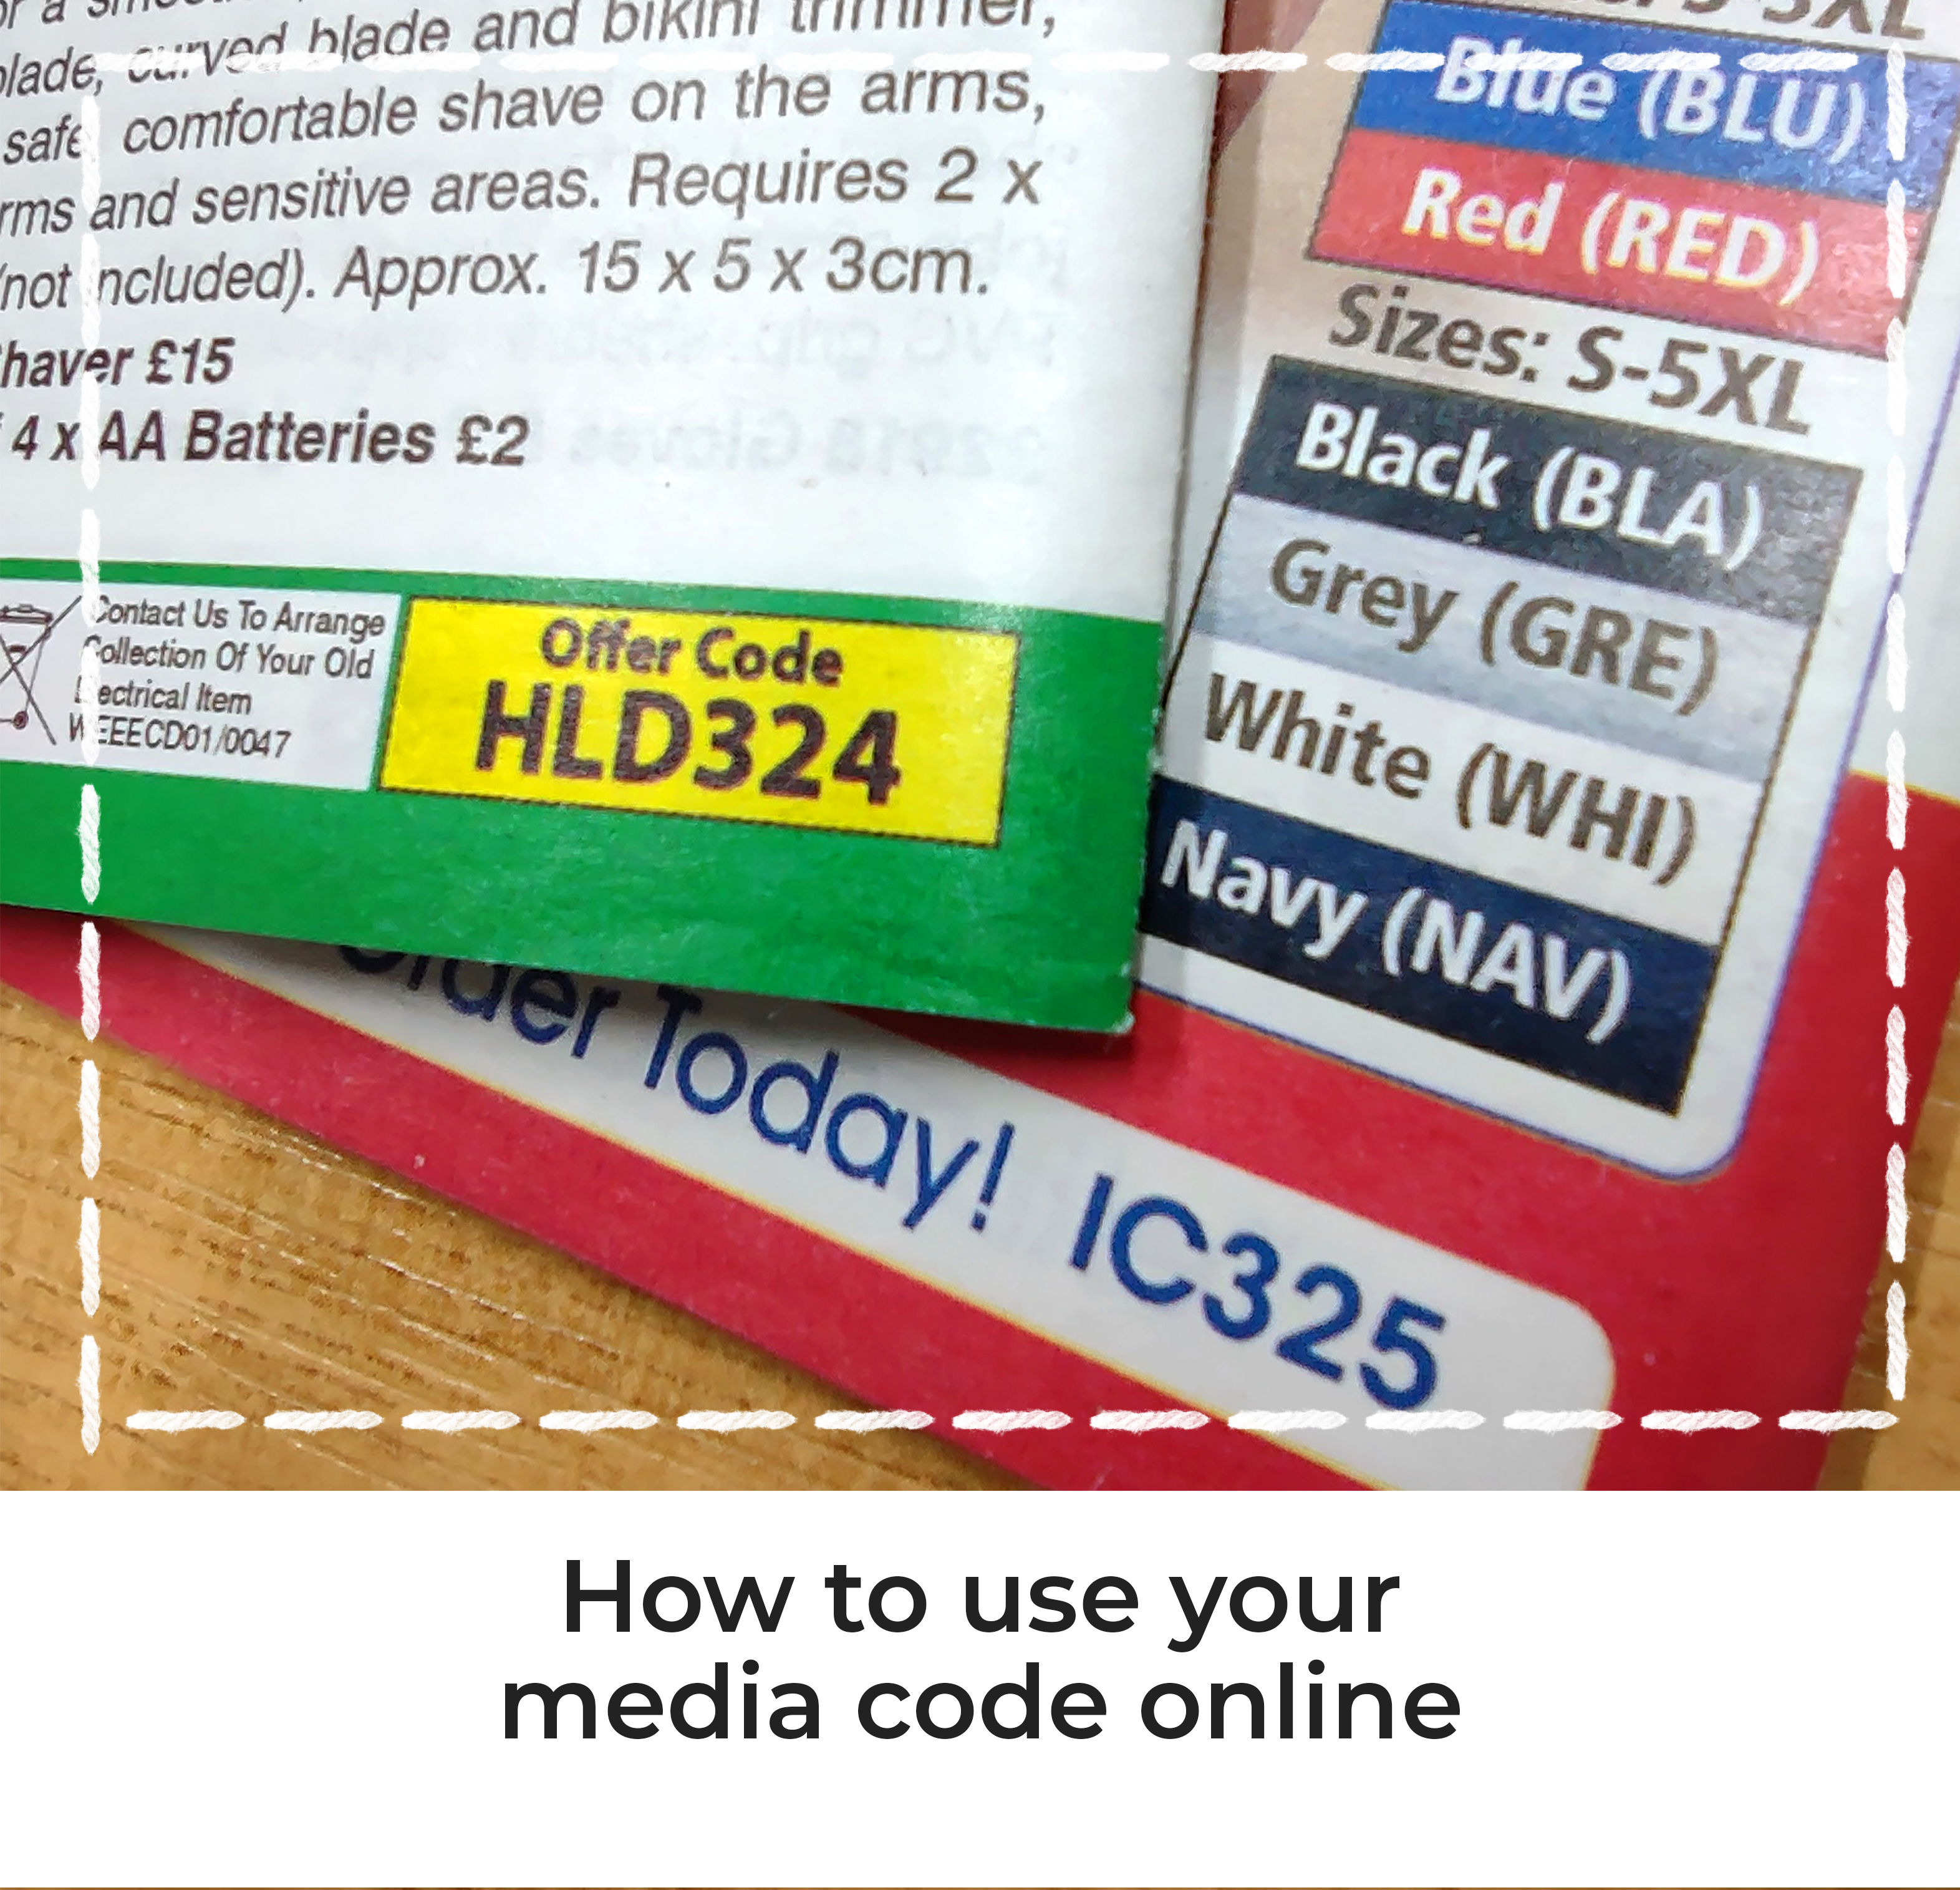 Reverse of catalogue showing media code